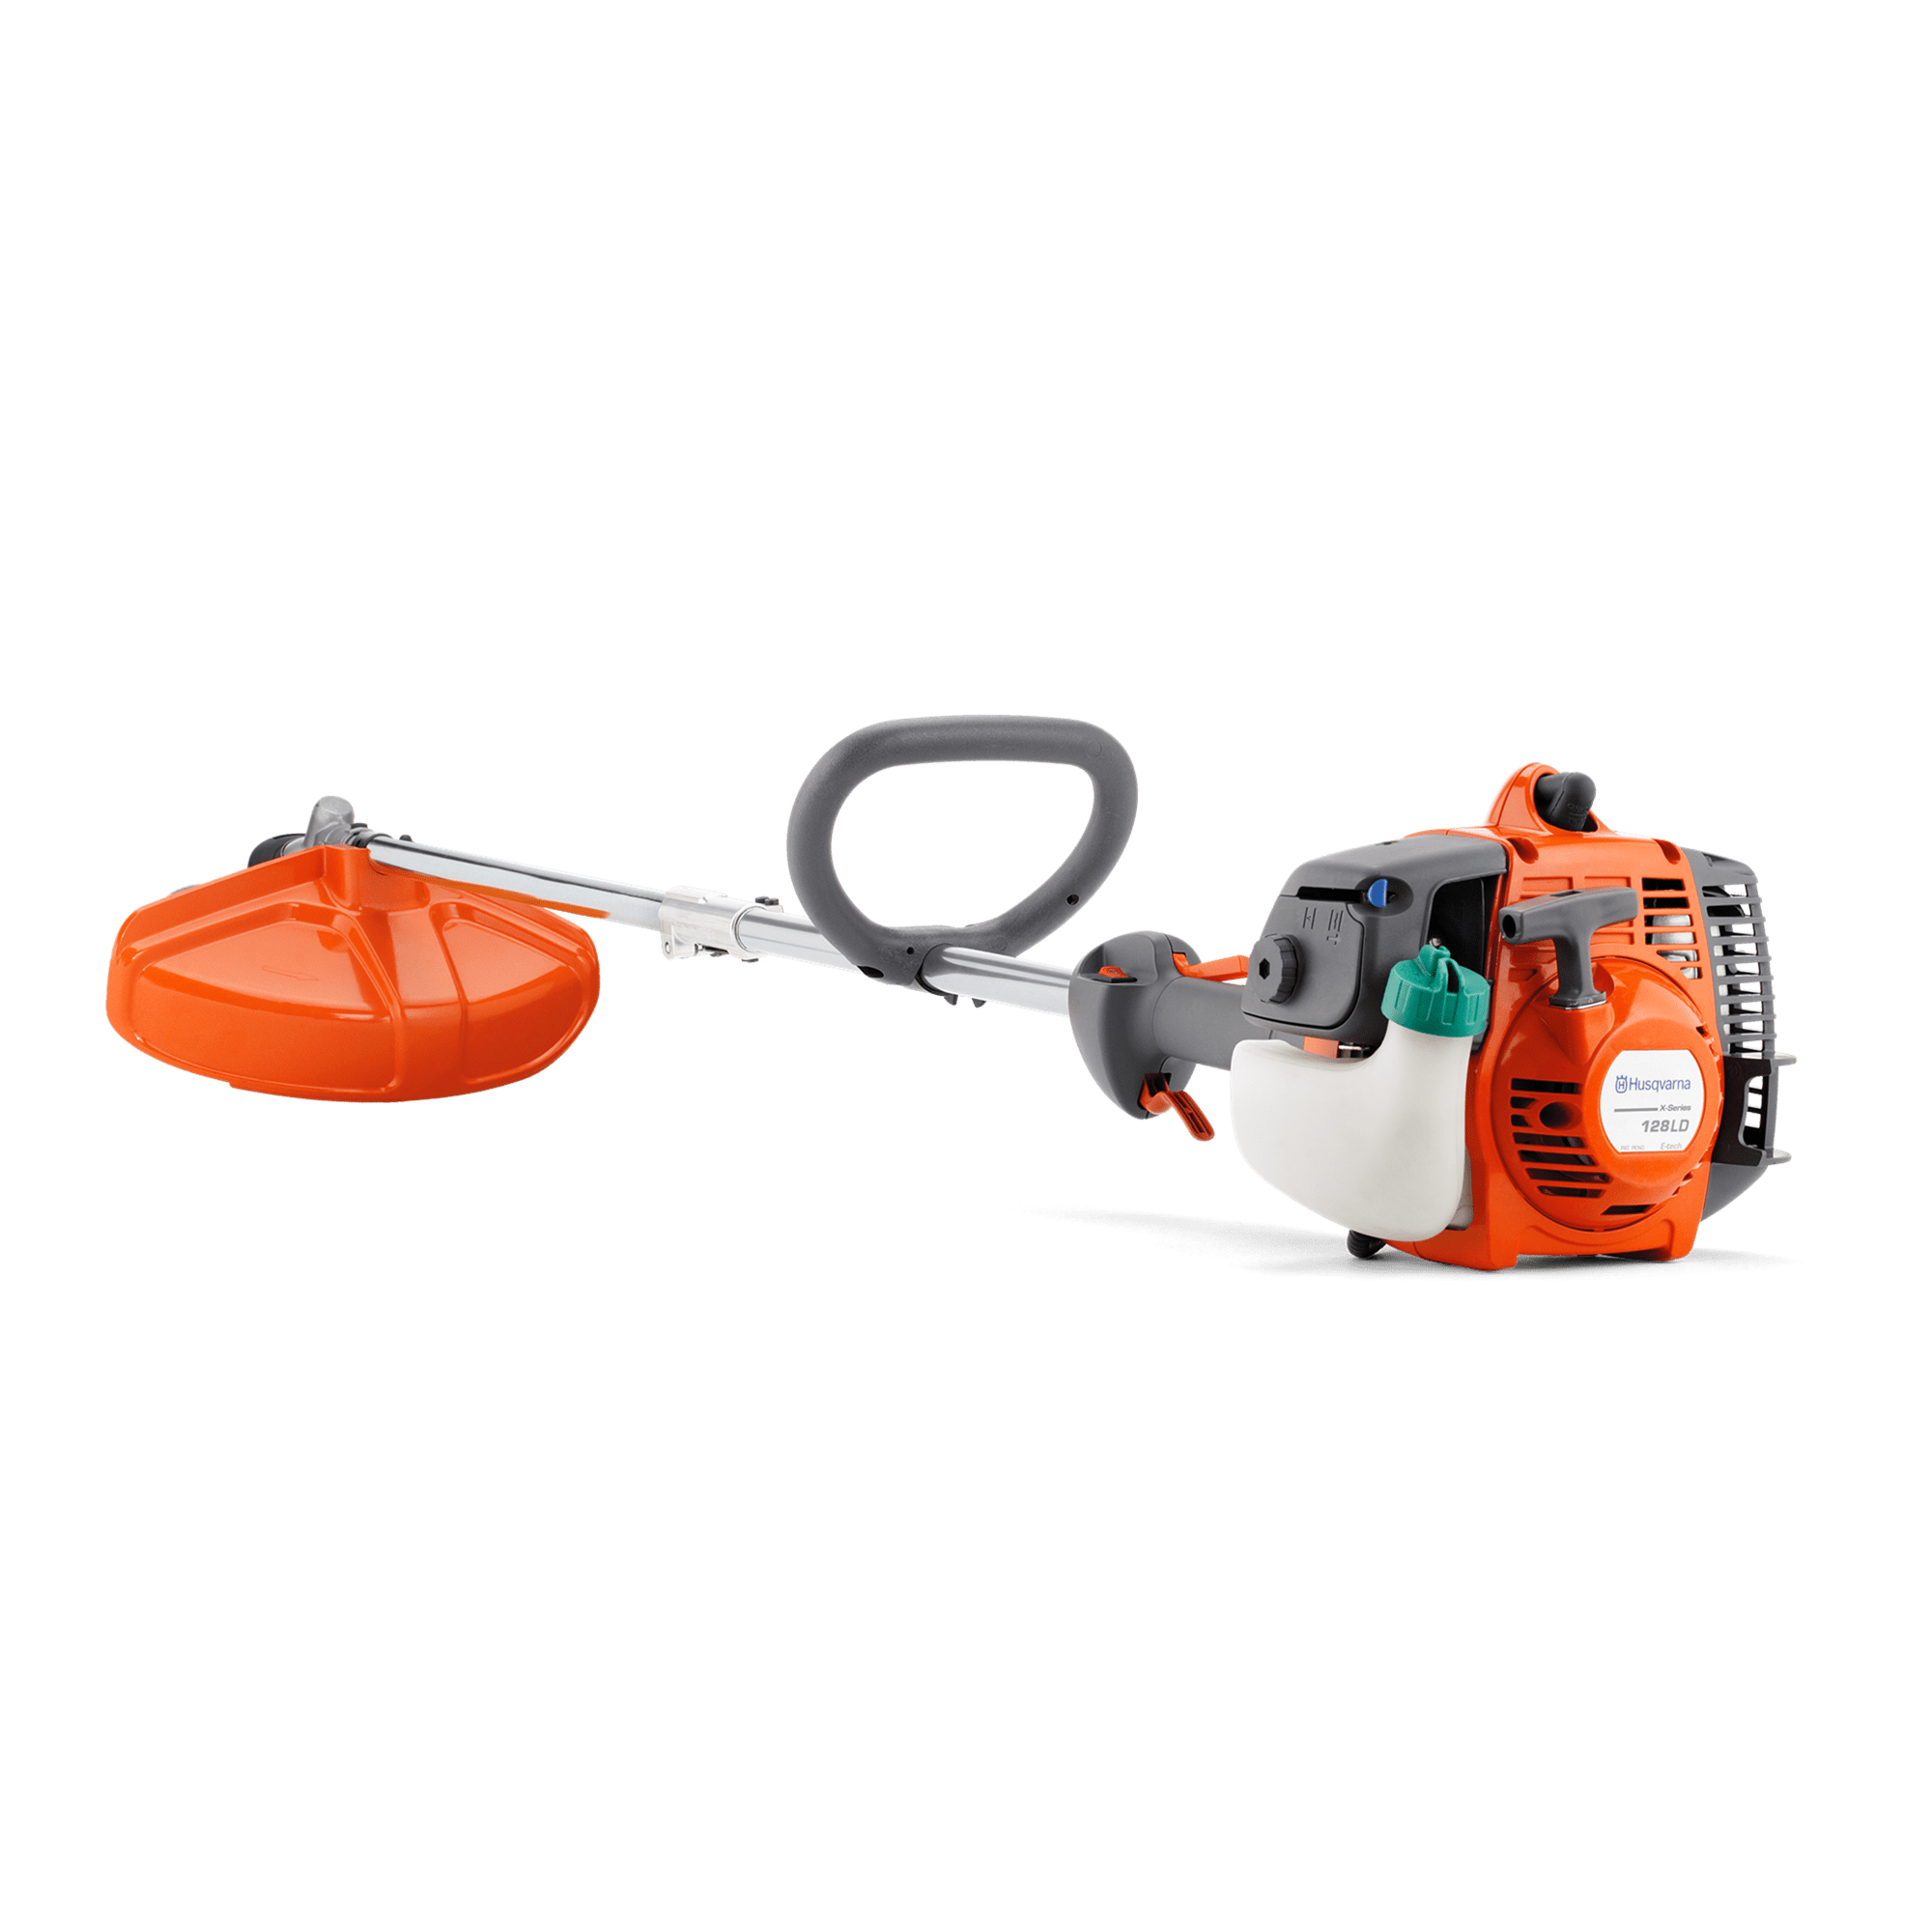 Image for 128LD Gas Straight Shaft String Trimmer                                                                                          from HusqvarnaB2C